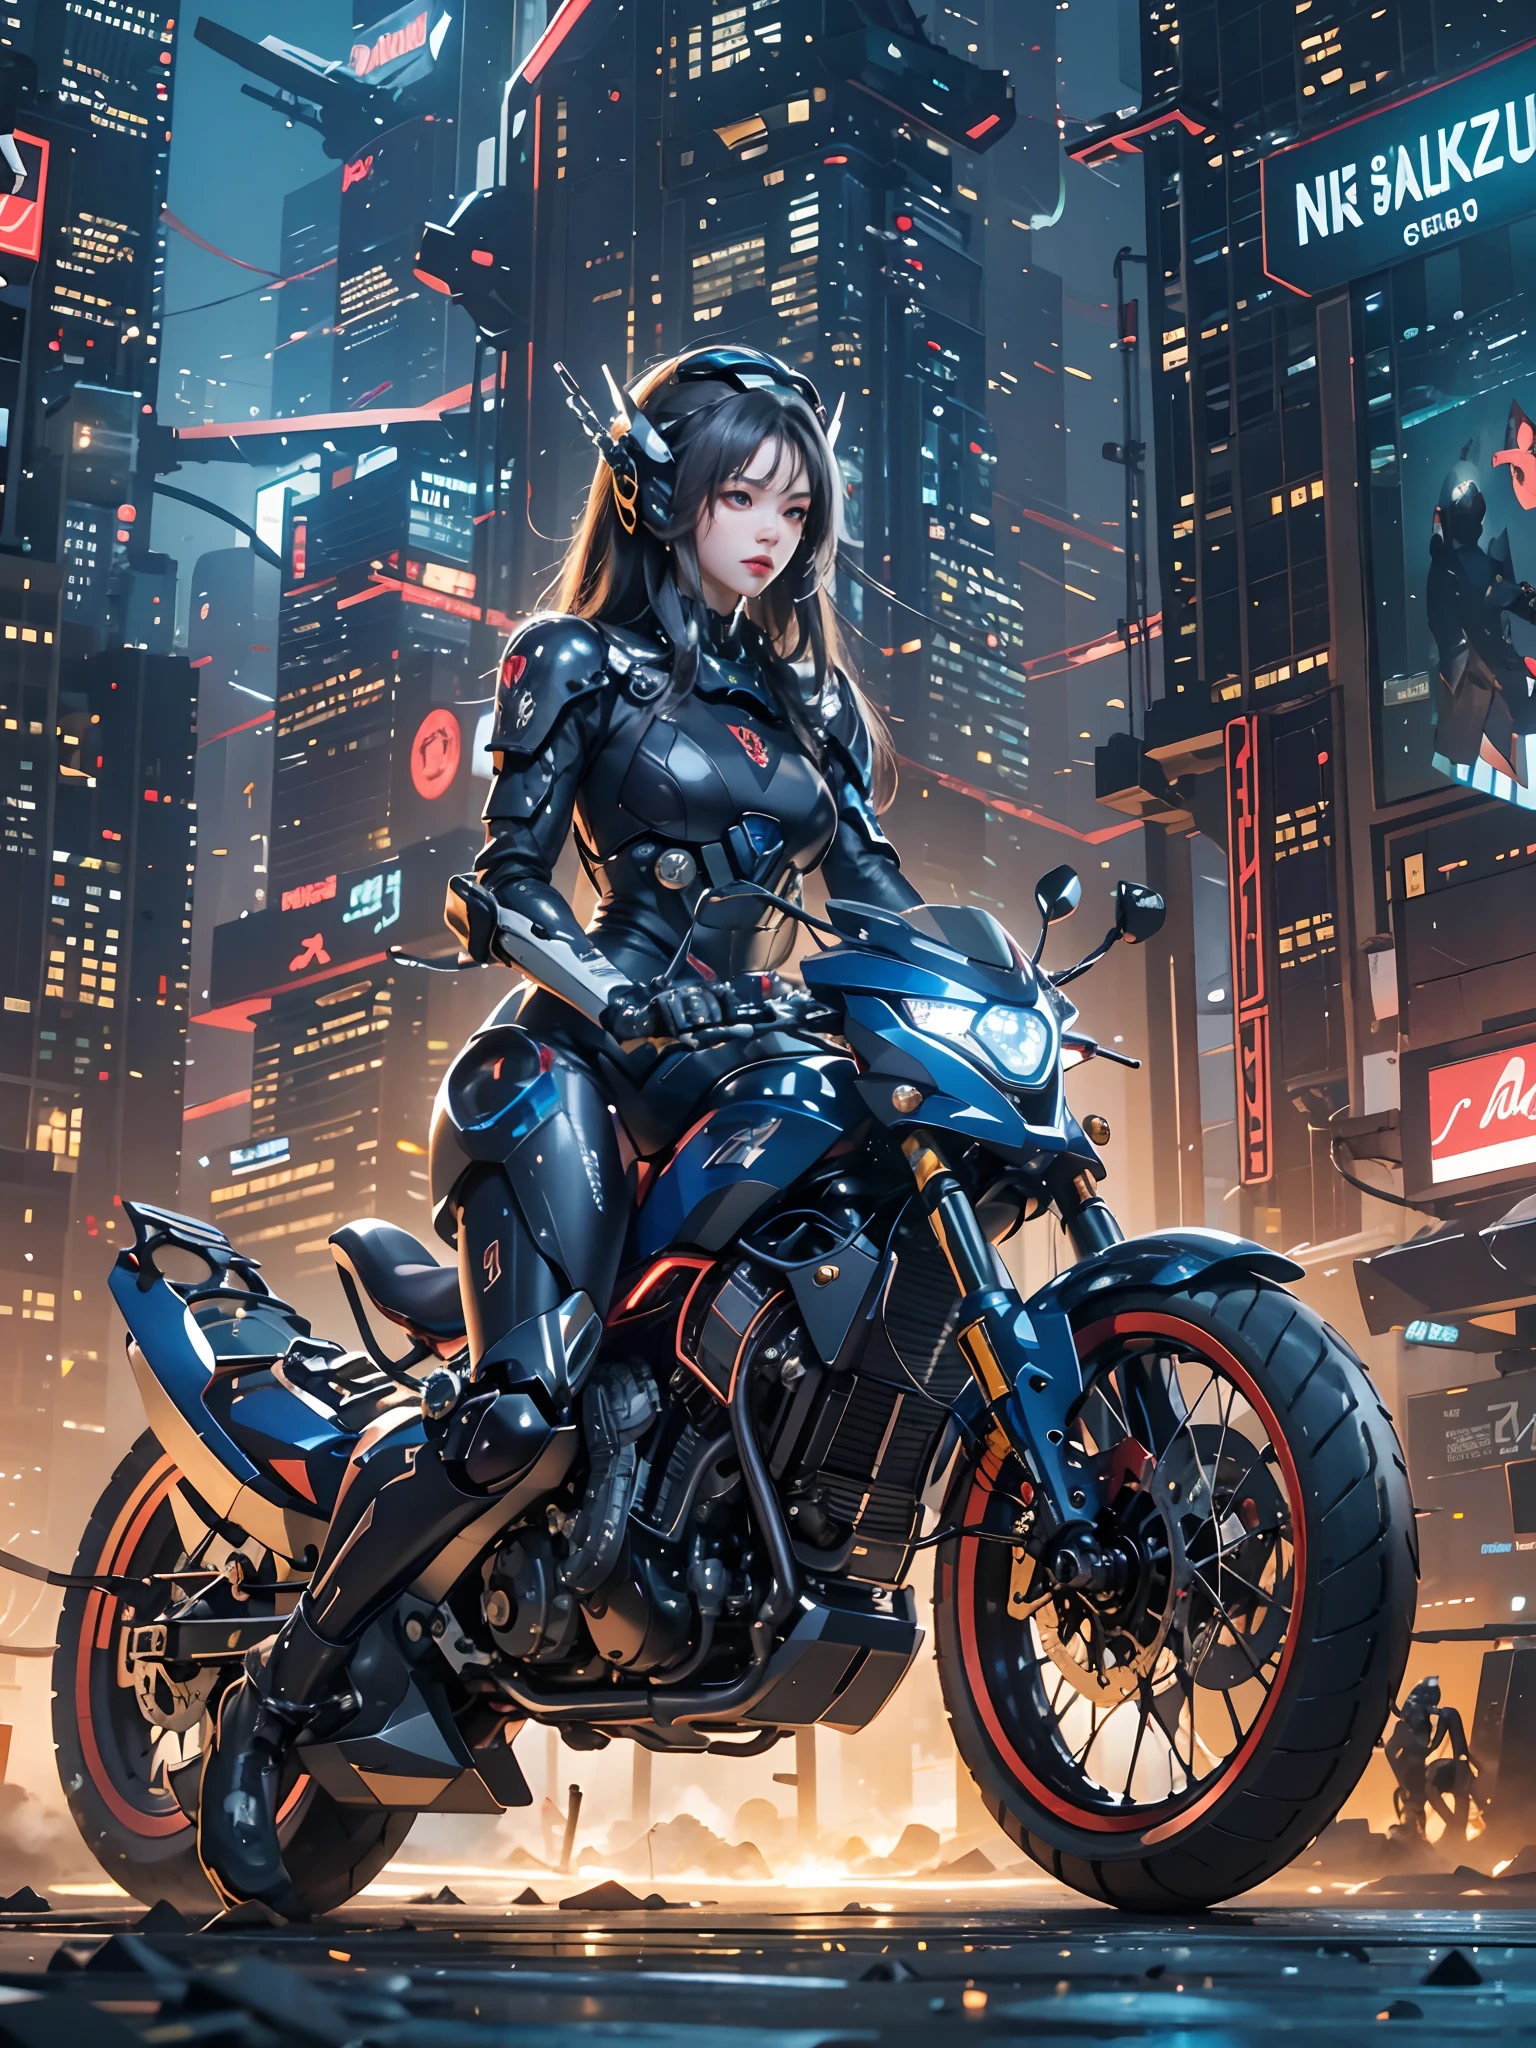 Highest image quality, Outstanding details, Ultra-high resolution, (Realism: 1.4), The best illustration, favor details, highly condensed 1girl, with a delicate and beautiful face, Dressed in black and blue mechs, wearing a mech helmet, holding a directional controller, Riding on a motorcycle, the background is a high-tech lighting scene of the city of the future.